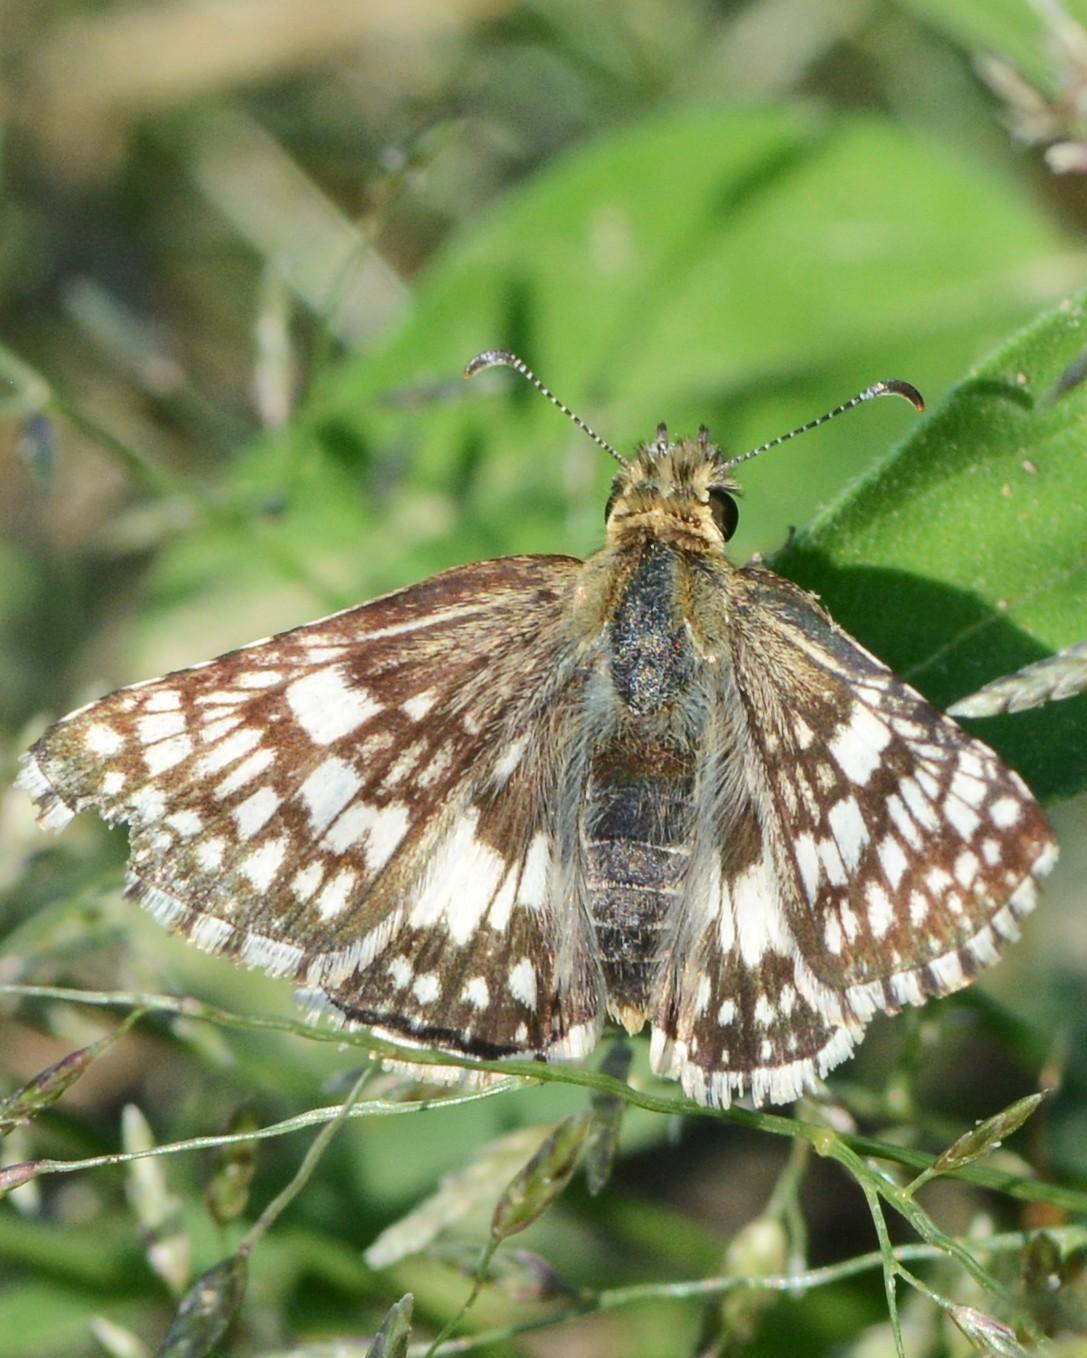 Common Checkered-Skipper Photo by David Hollie